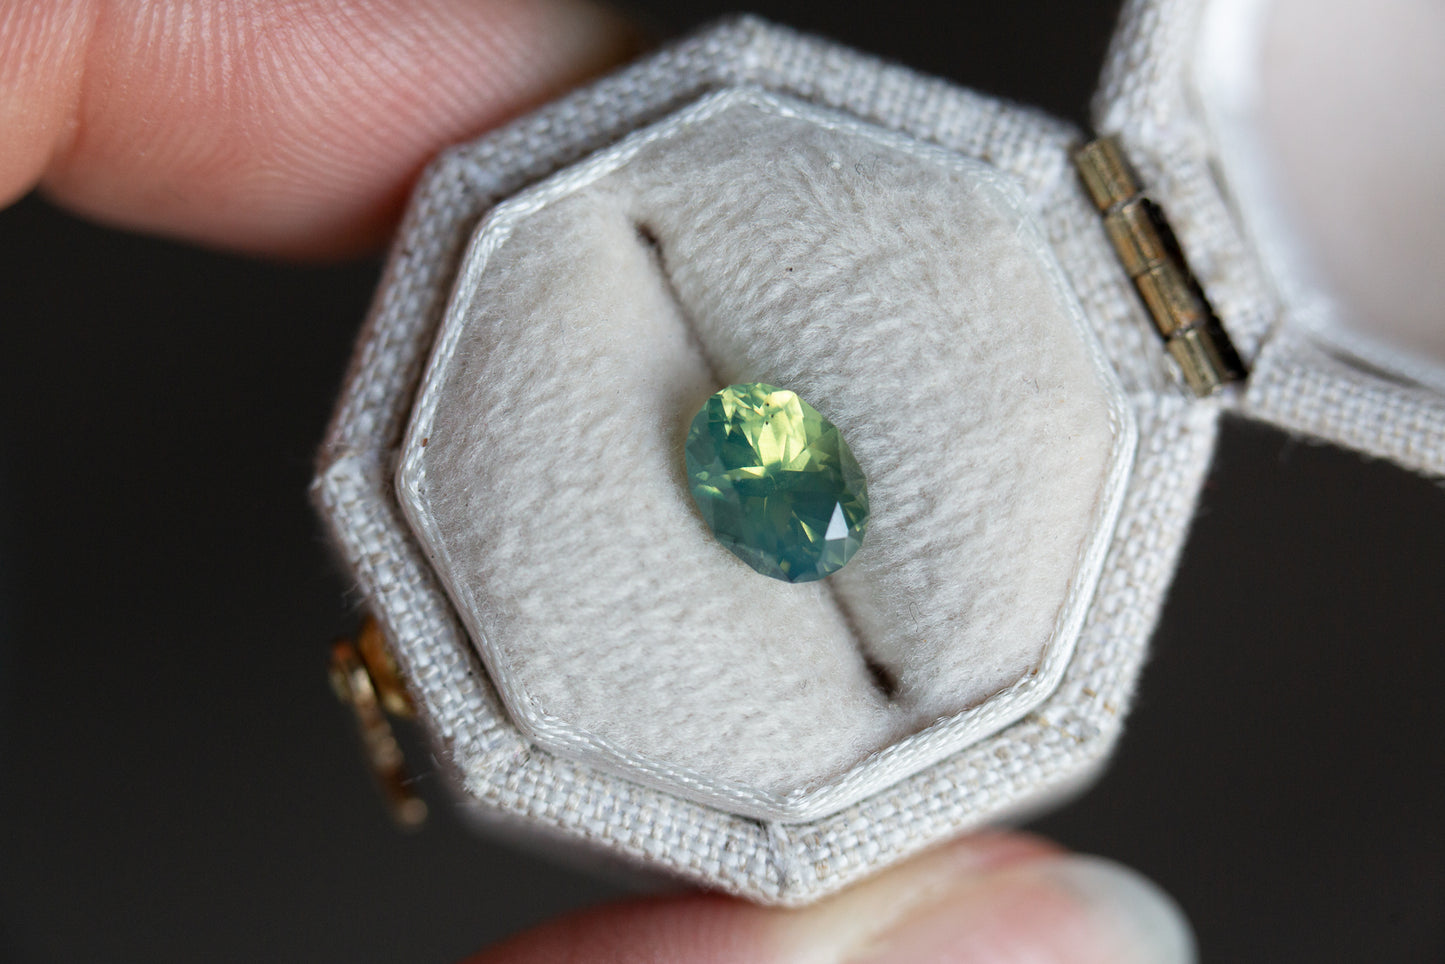 Load image into Gallery viewer, 1.57ct rare oval opalescent teal sapphire
